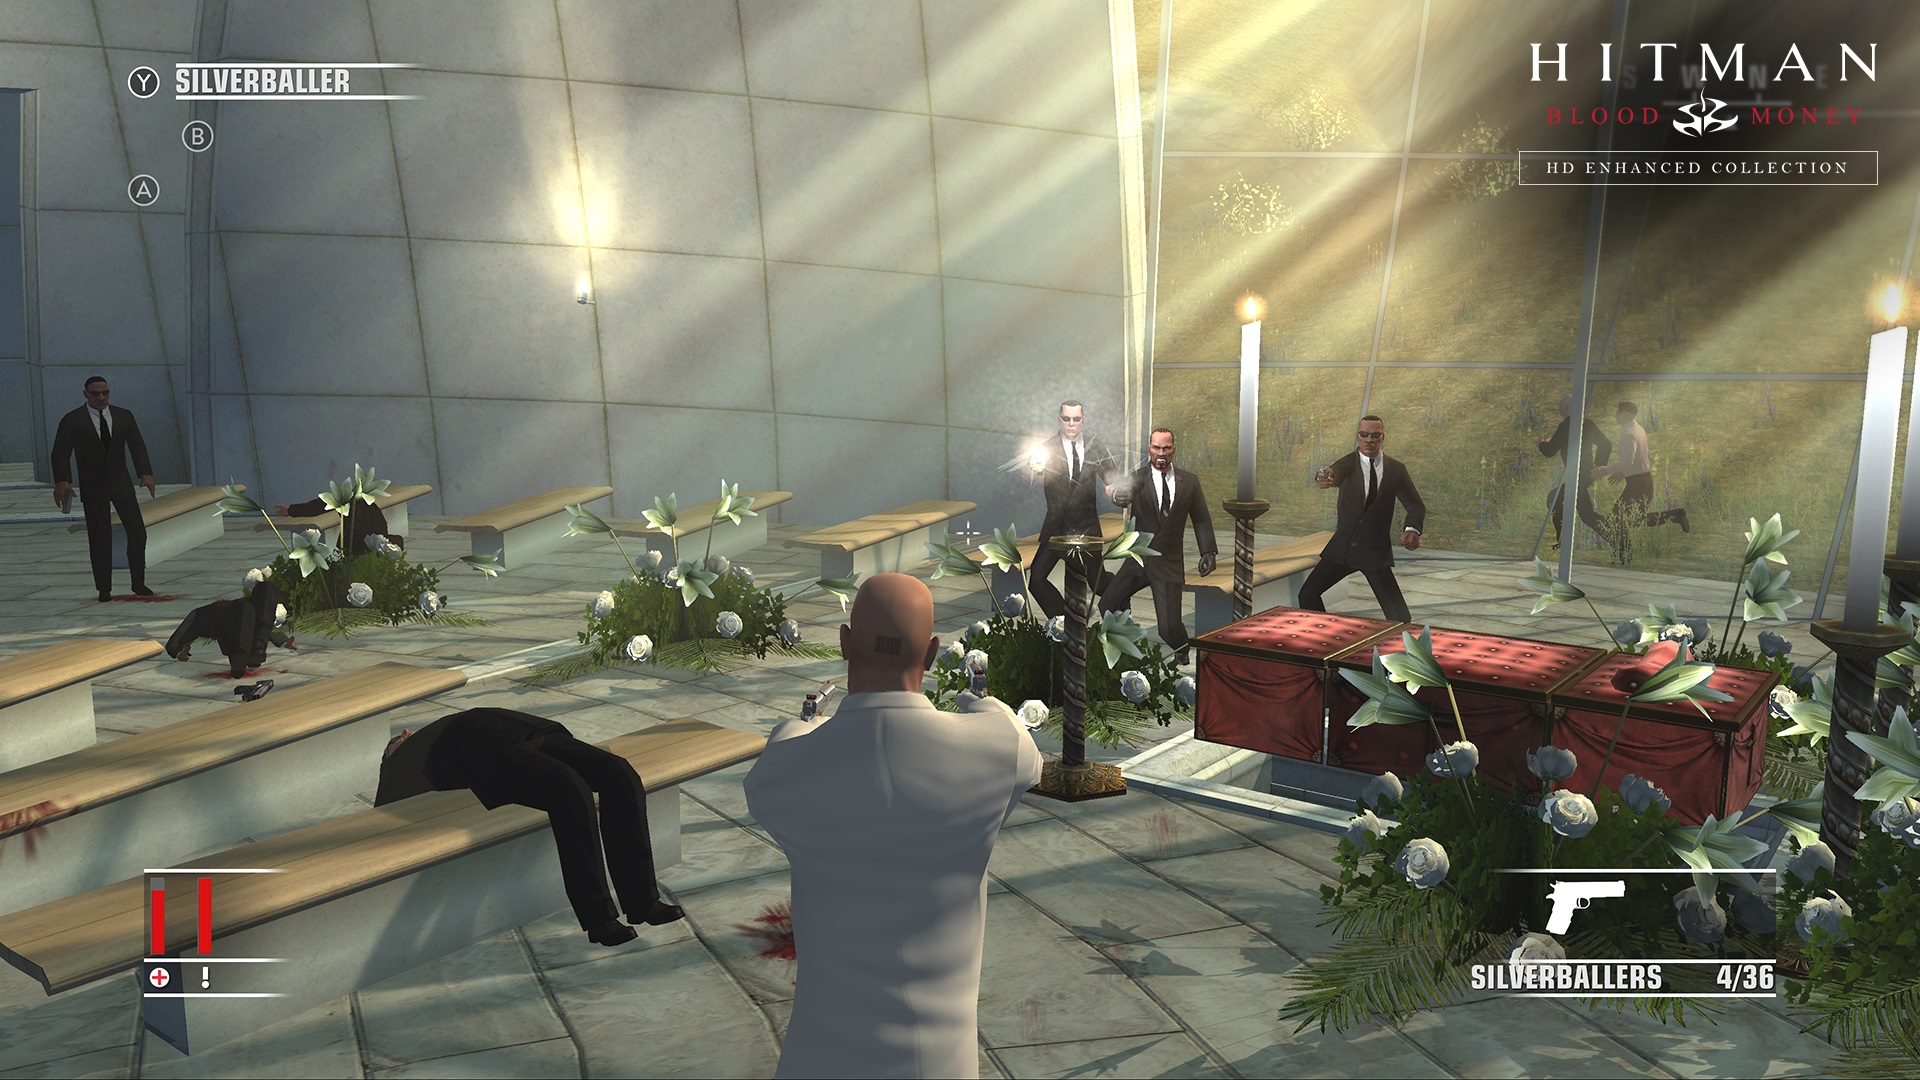 Hitman HD Enhanced Collection Was with Help From Mipumi Games